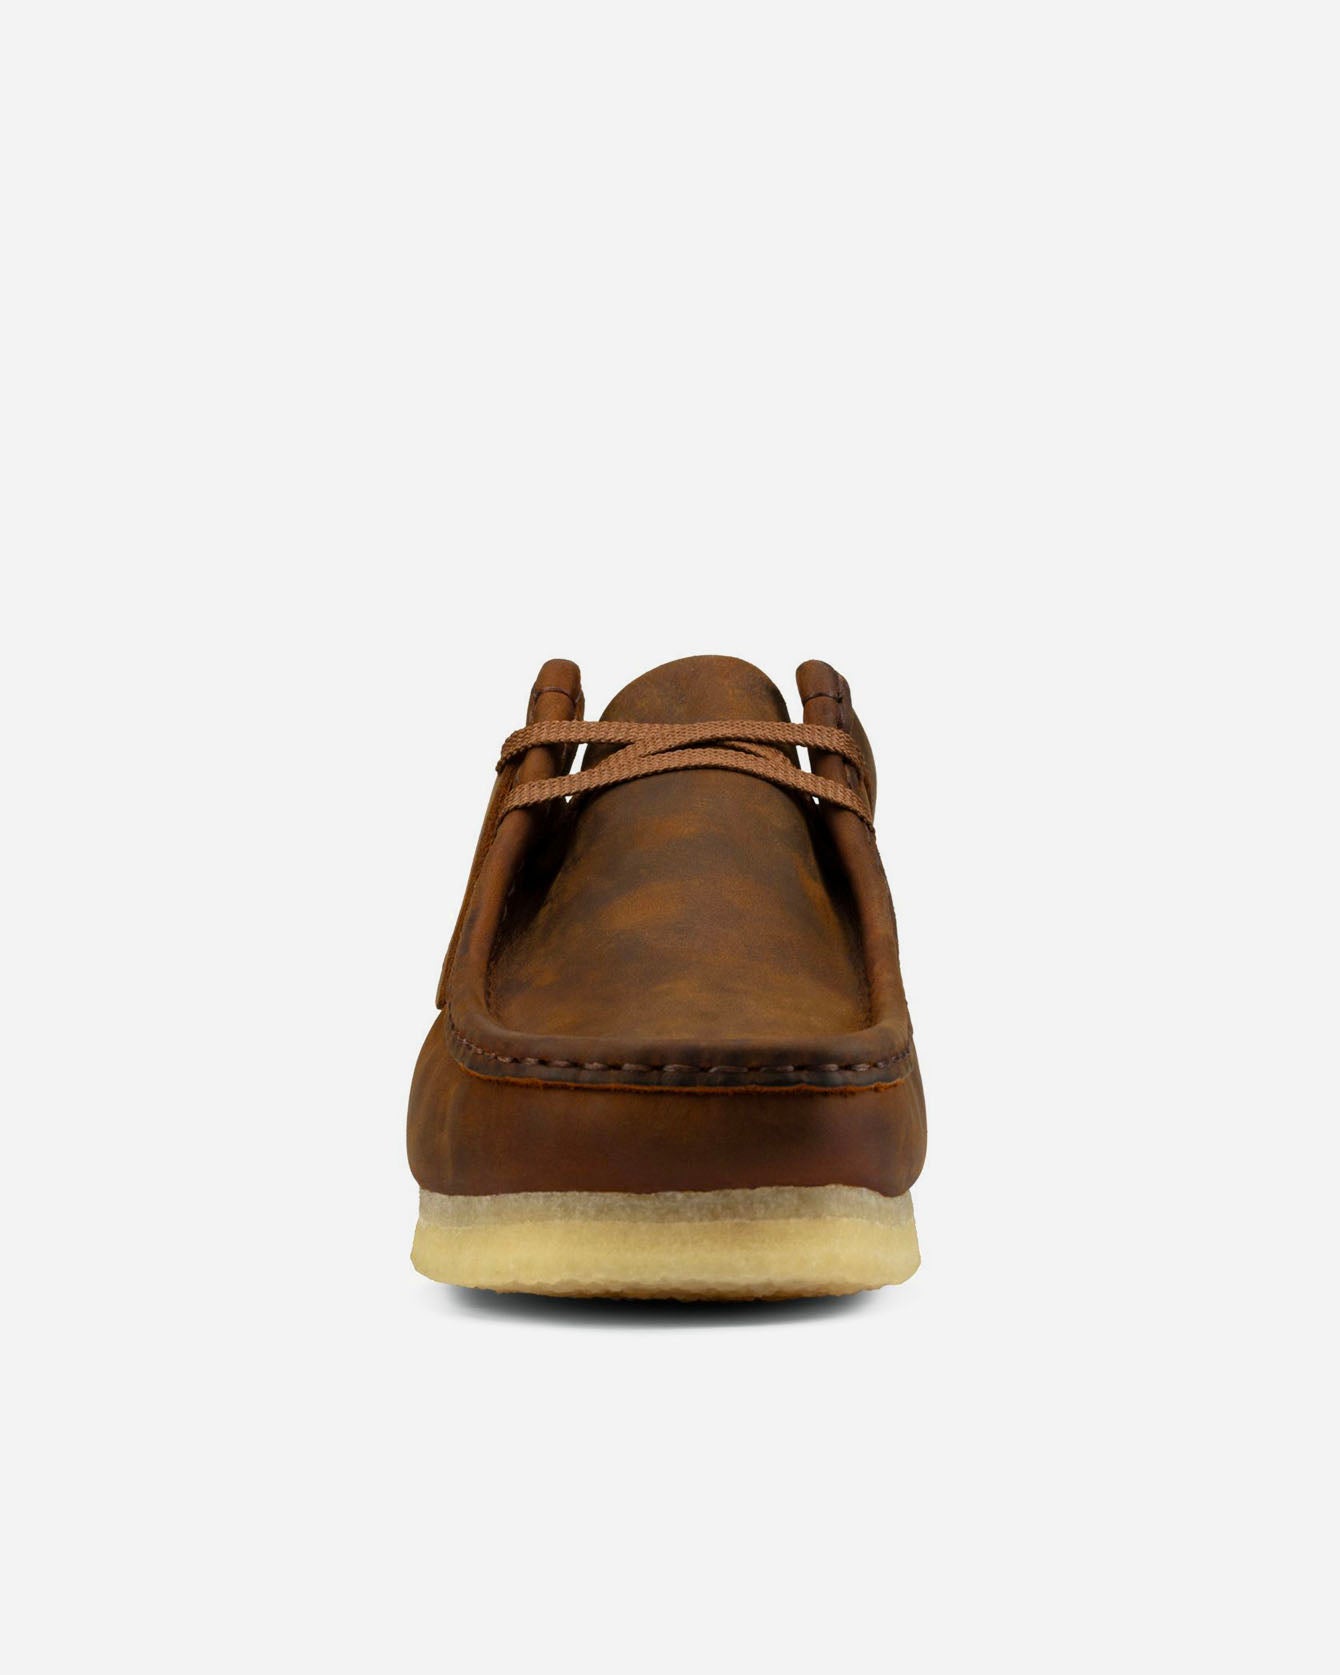 Wallabee - Beeswax Leather